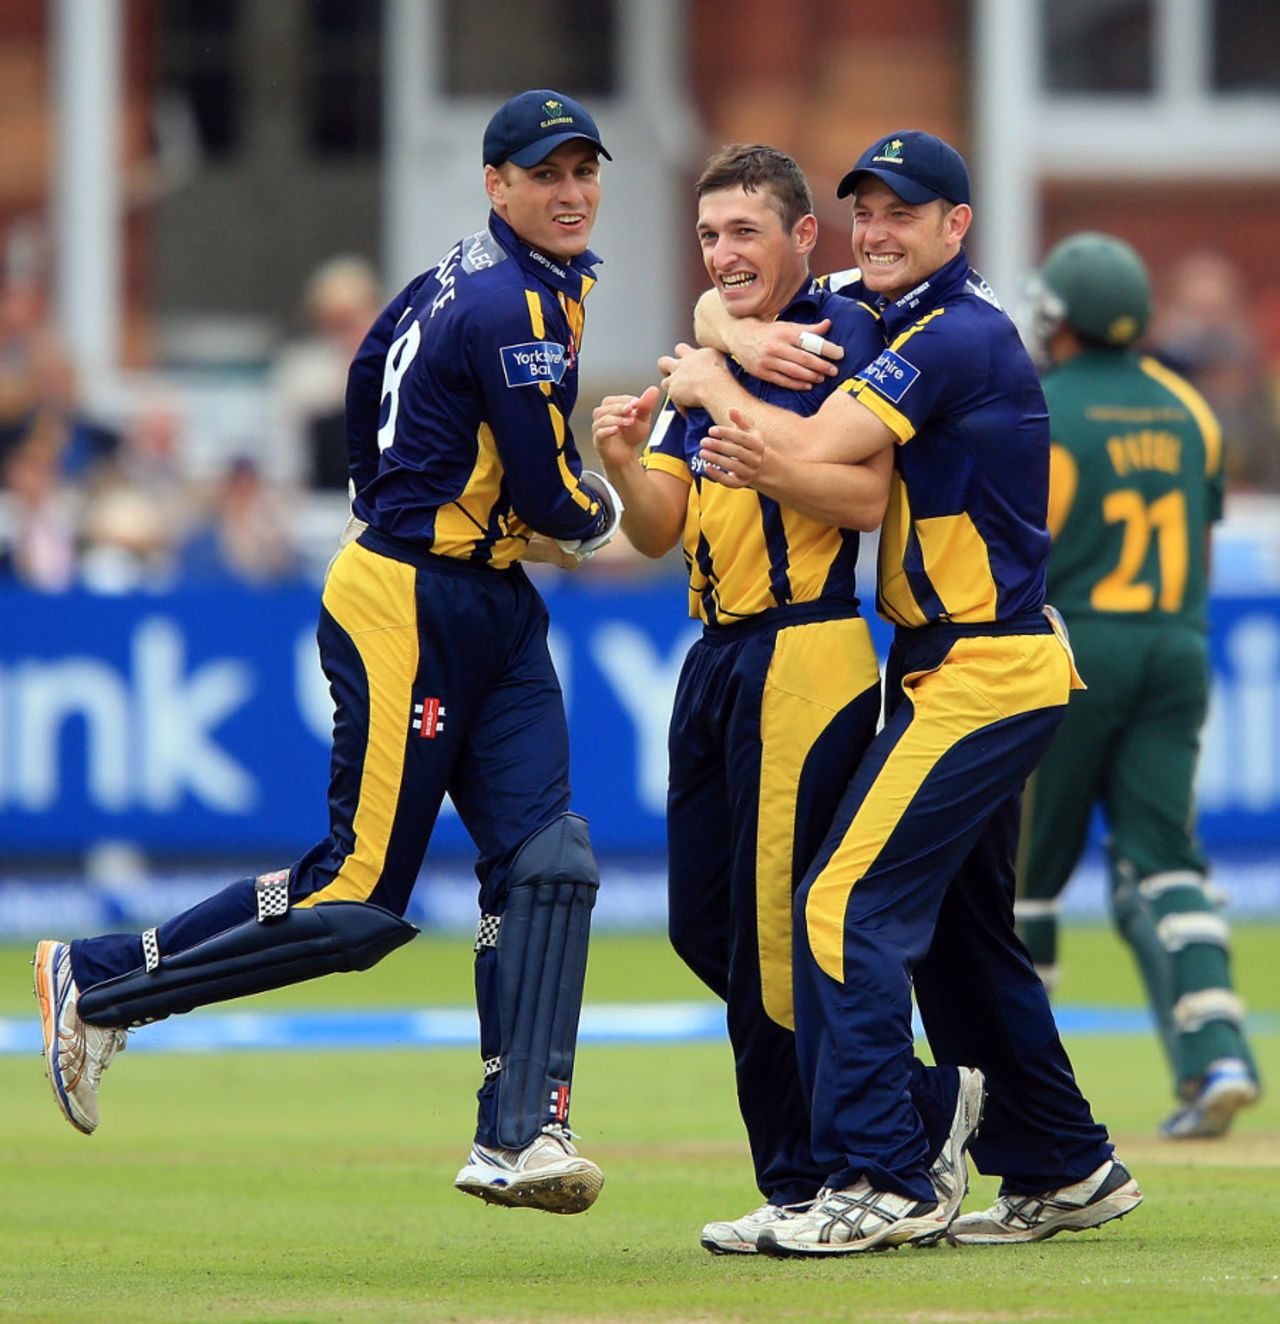 The 20-year-old offspinner Andrew Salter impressed at Lord's, Glamorgan v Nottinghamshire, YB40 final, Lord's, September 21, 2013